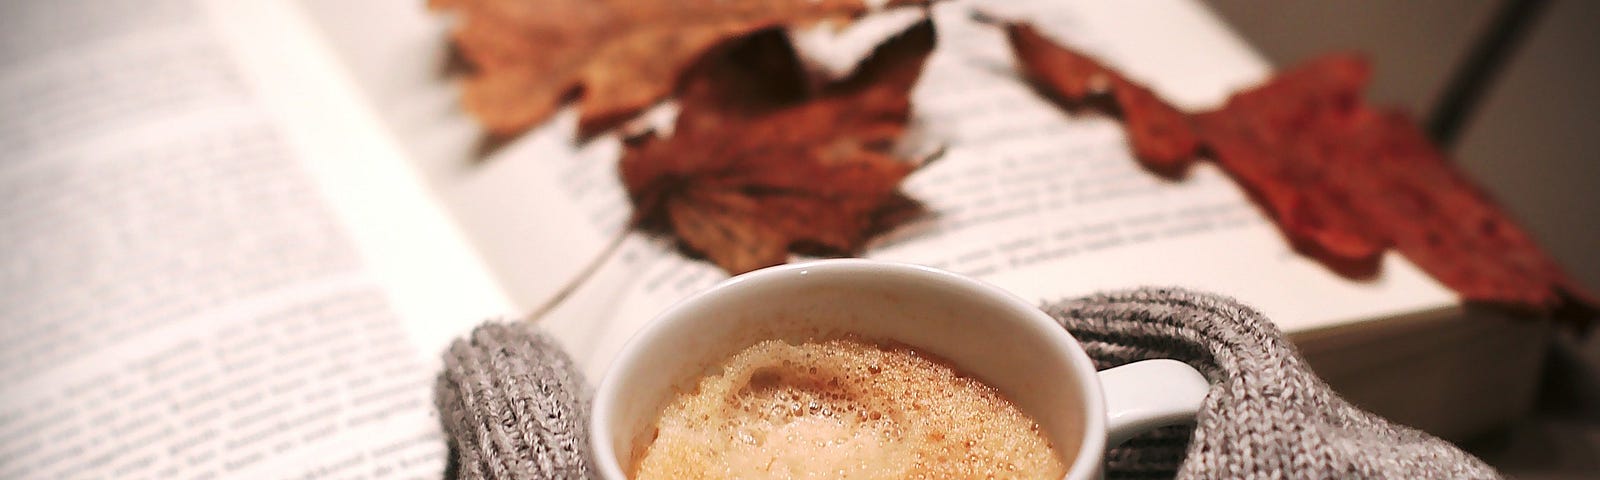 A cup of coffee, with a pair of grey gloves, an open book and some autumn leaves sitting on the pages.